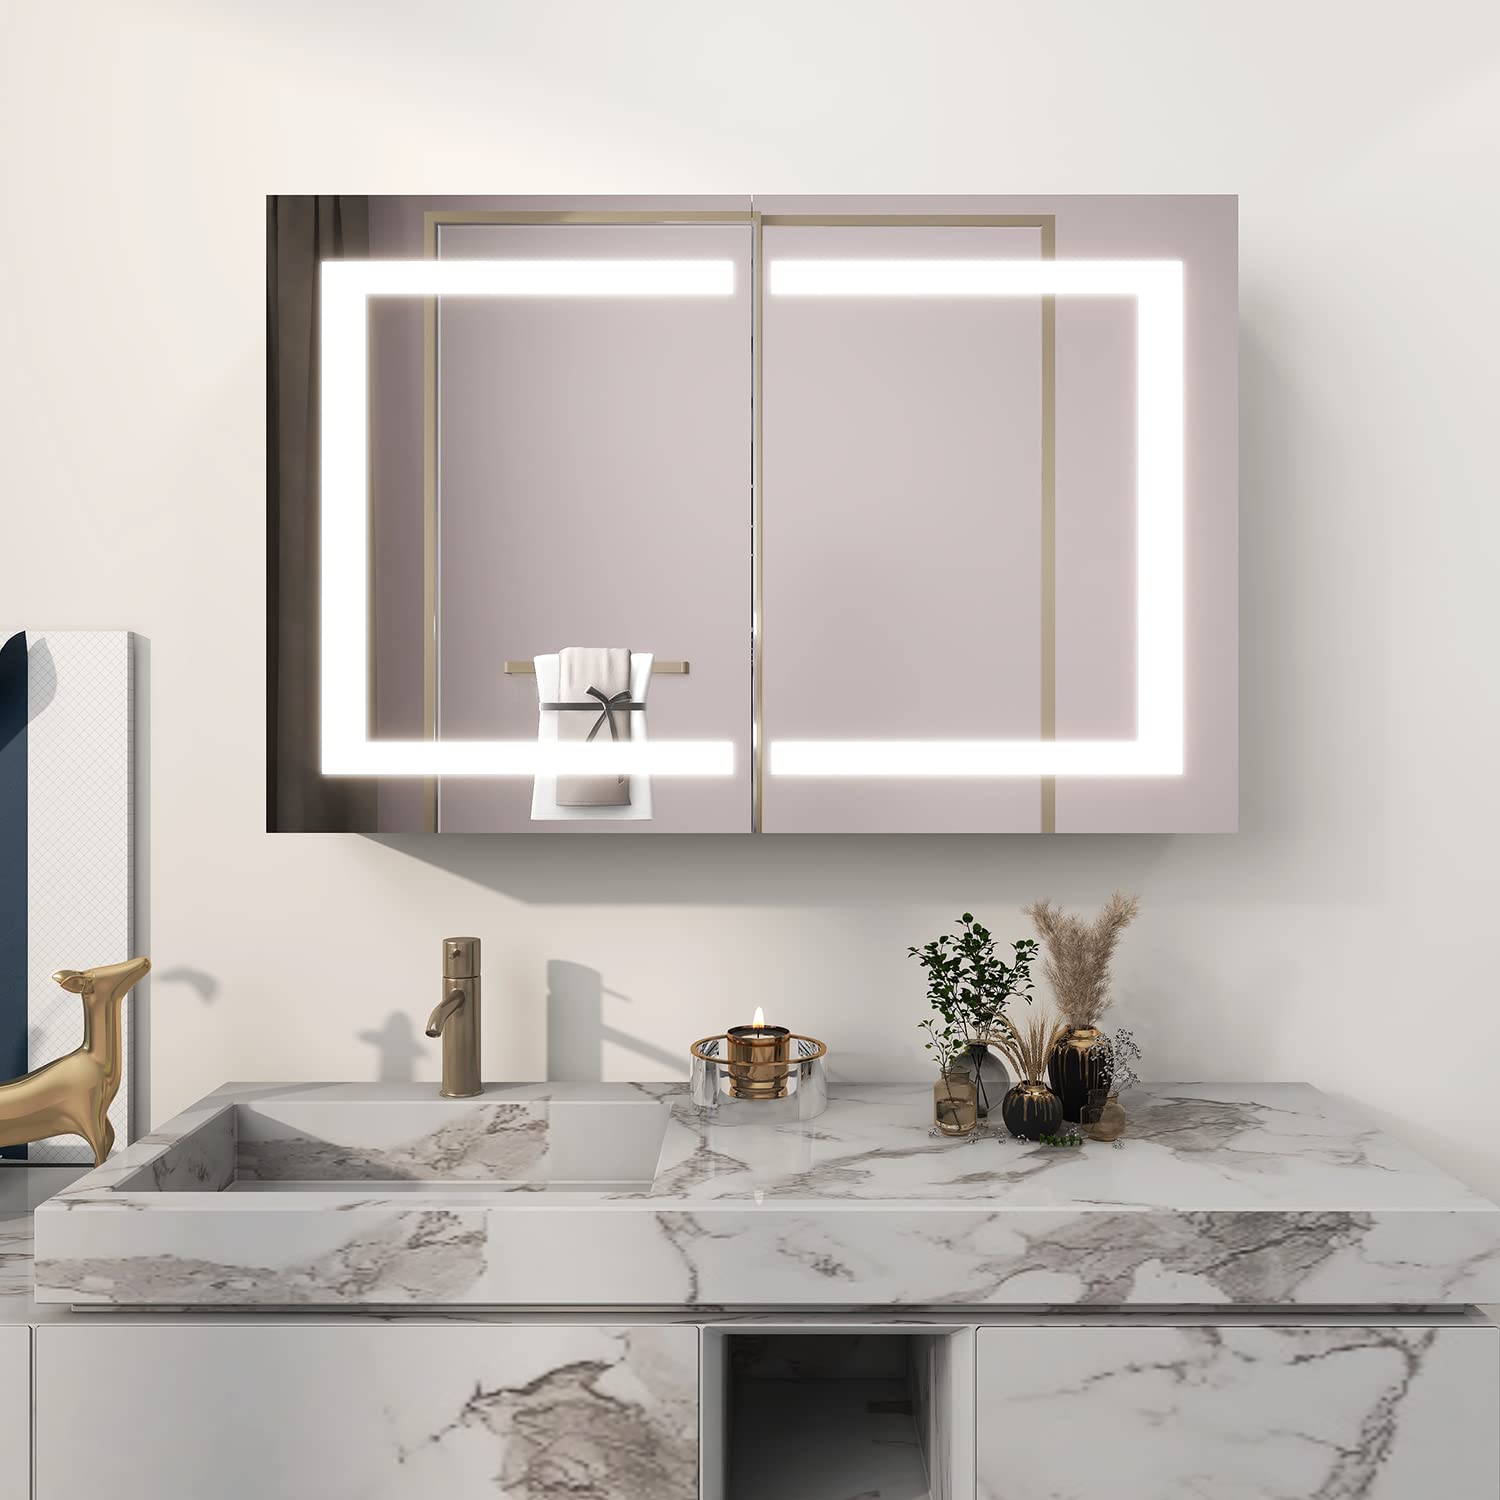 24 in. W x 30 in. H Silver Wall-Mounted/Recessed Mounted Medicine Cabinet with Mirror Bathroom Large Storage